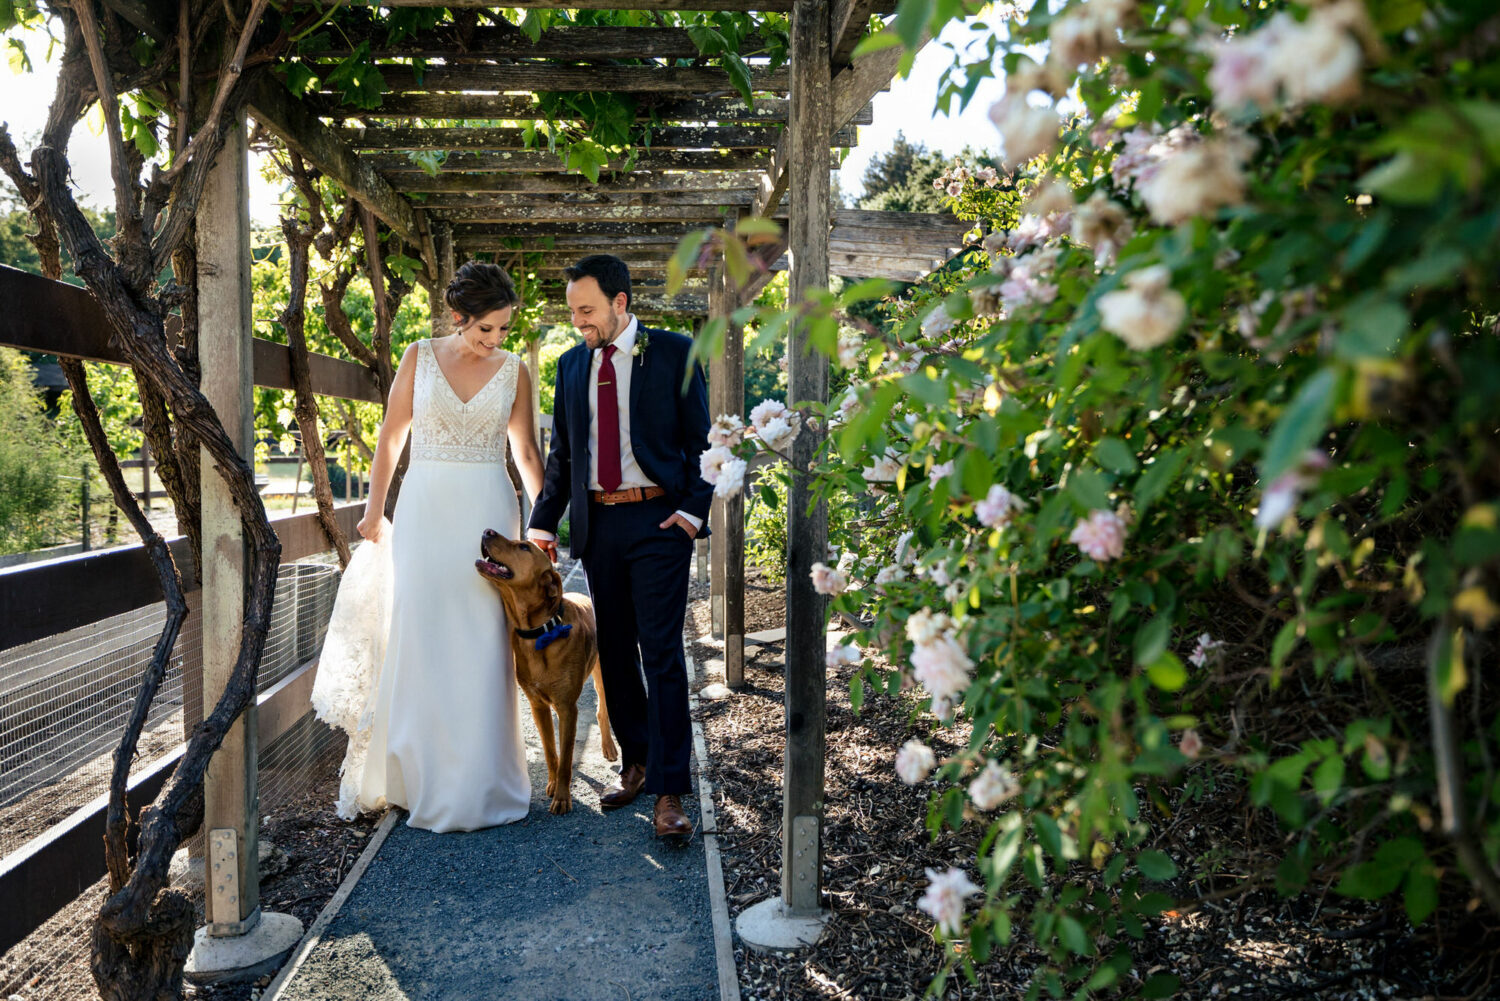 Bride and groom walking with their dog at a backyard wedding.